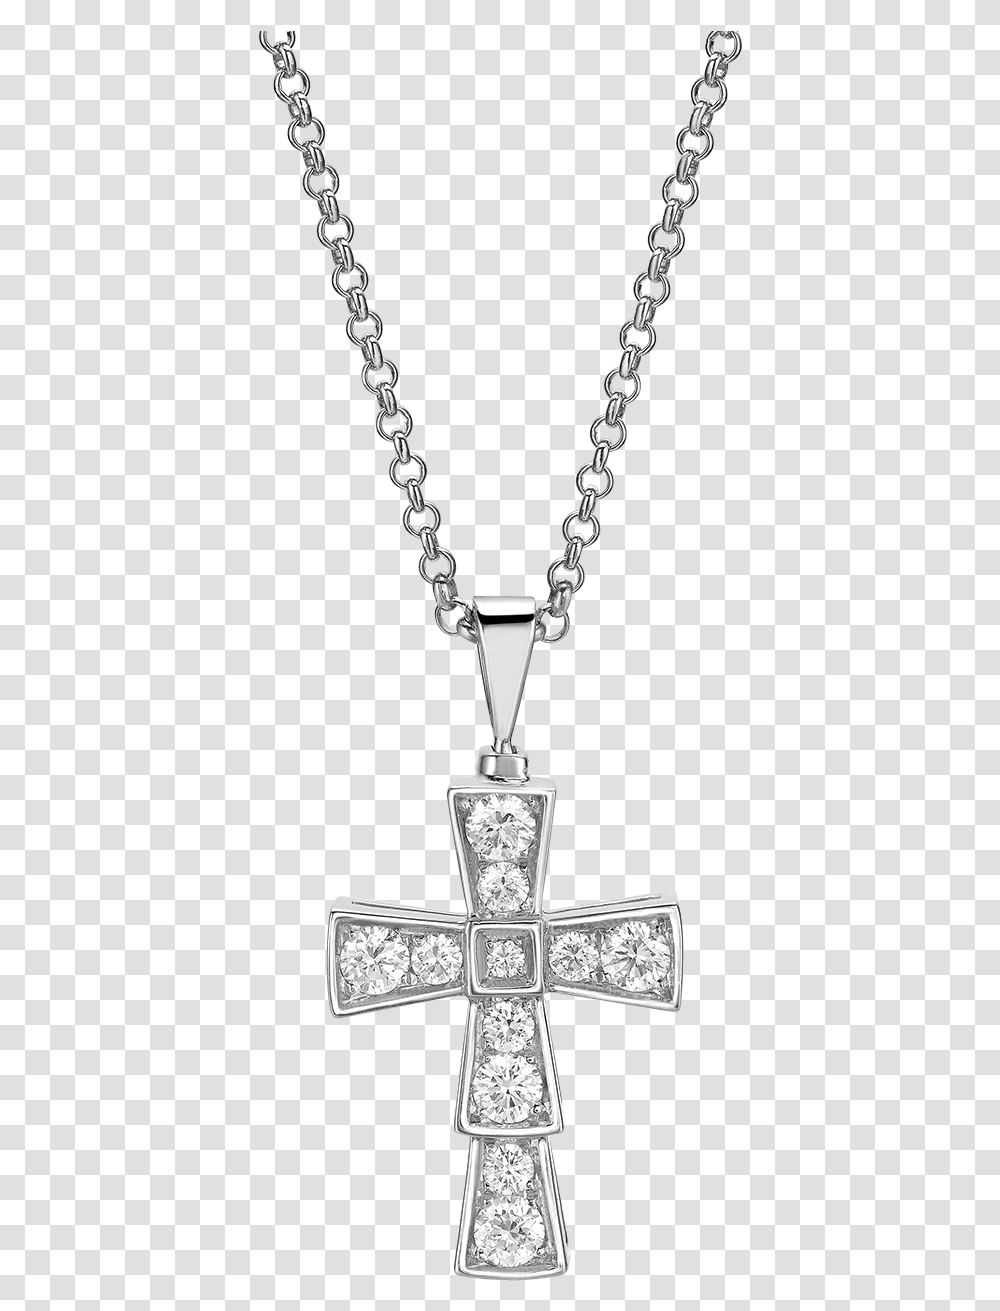 Bvlgari Cross Necklace, Pendant, Jewelry, Accessories Transparent Png